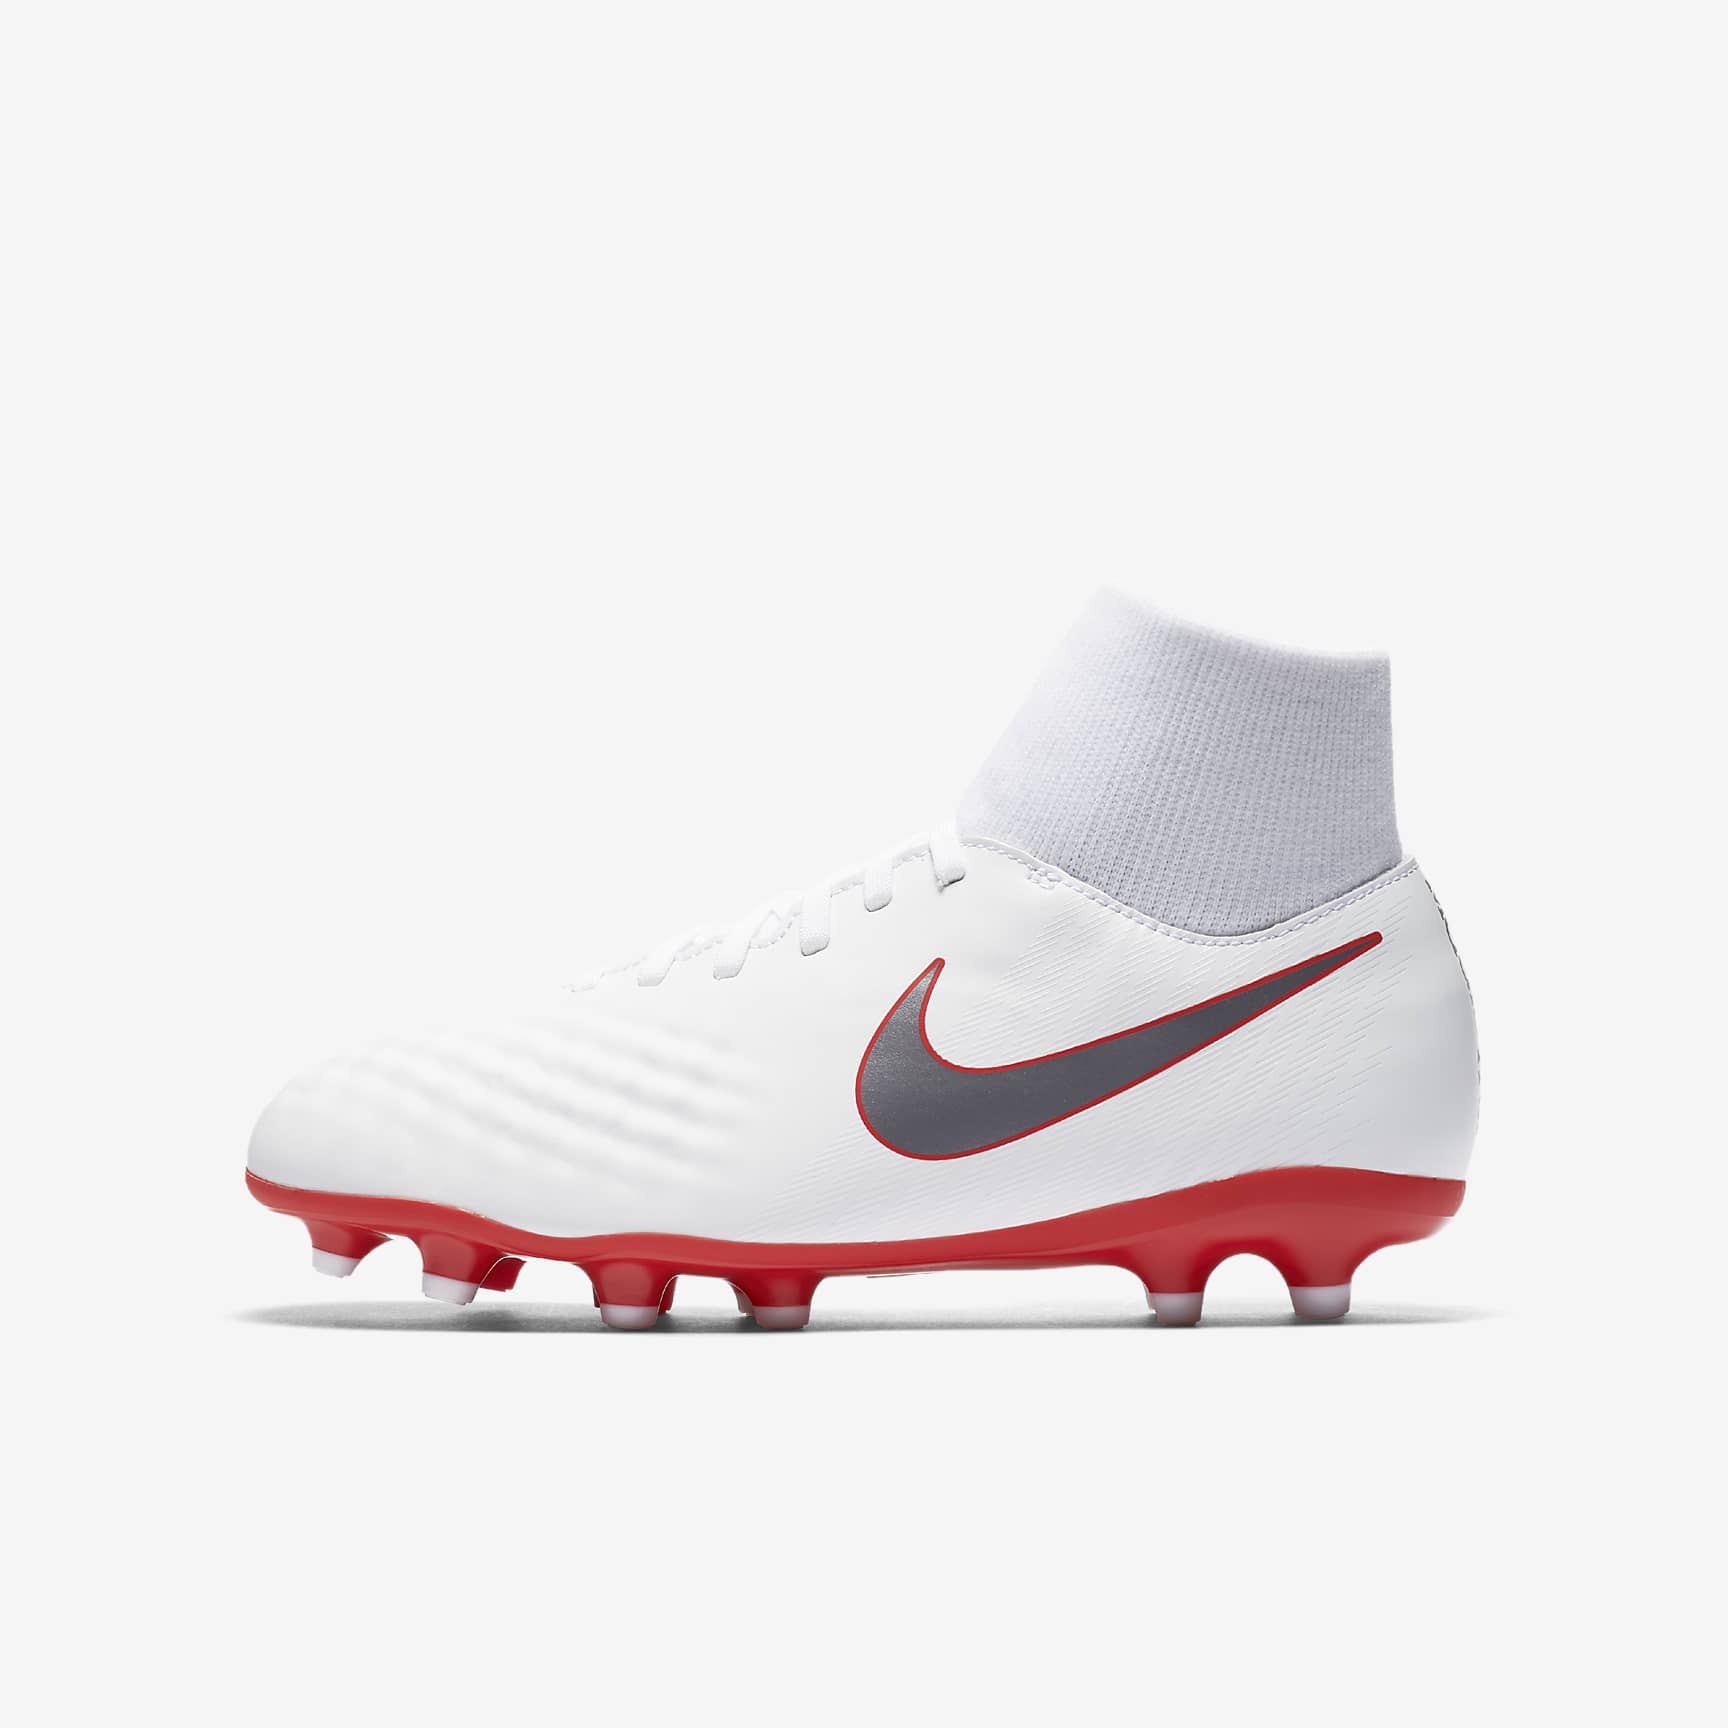 Nike Jr. Magista Obra II Academy Dynamic Fit Just Do It FG Younger ...